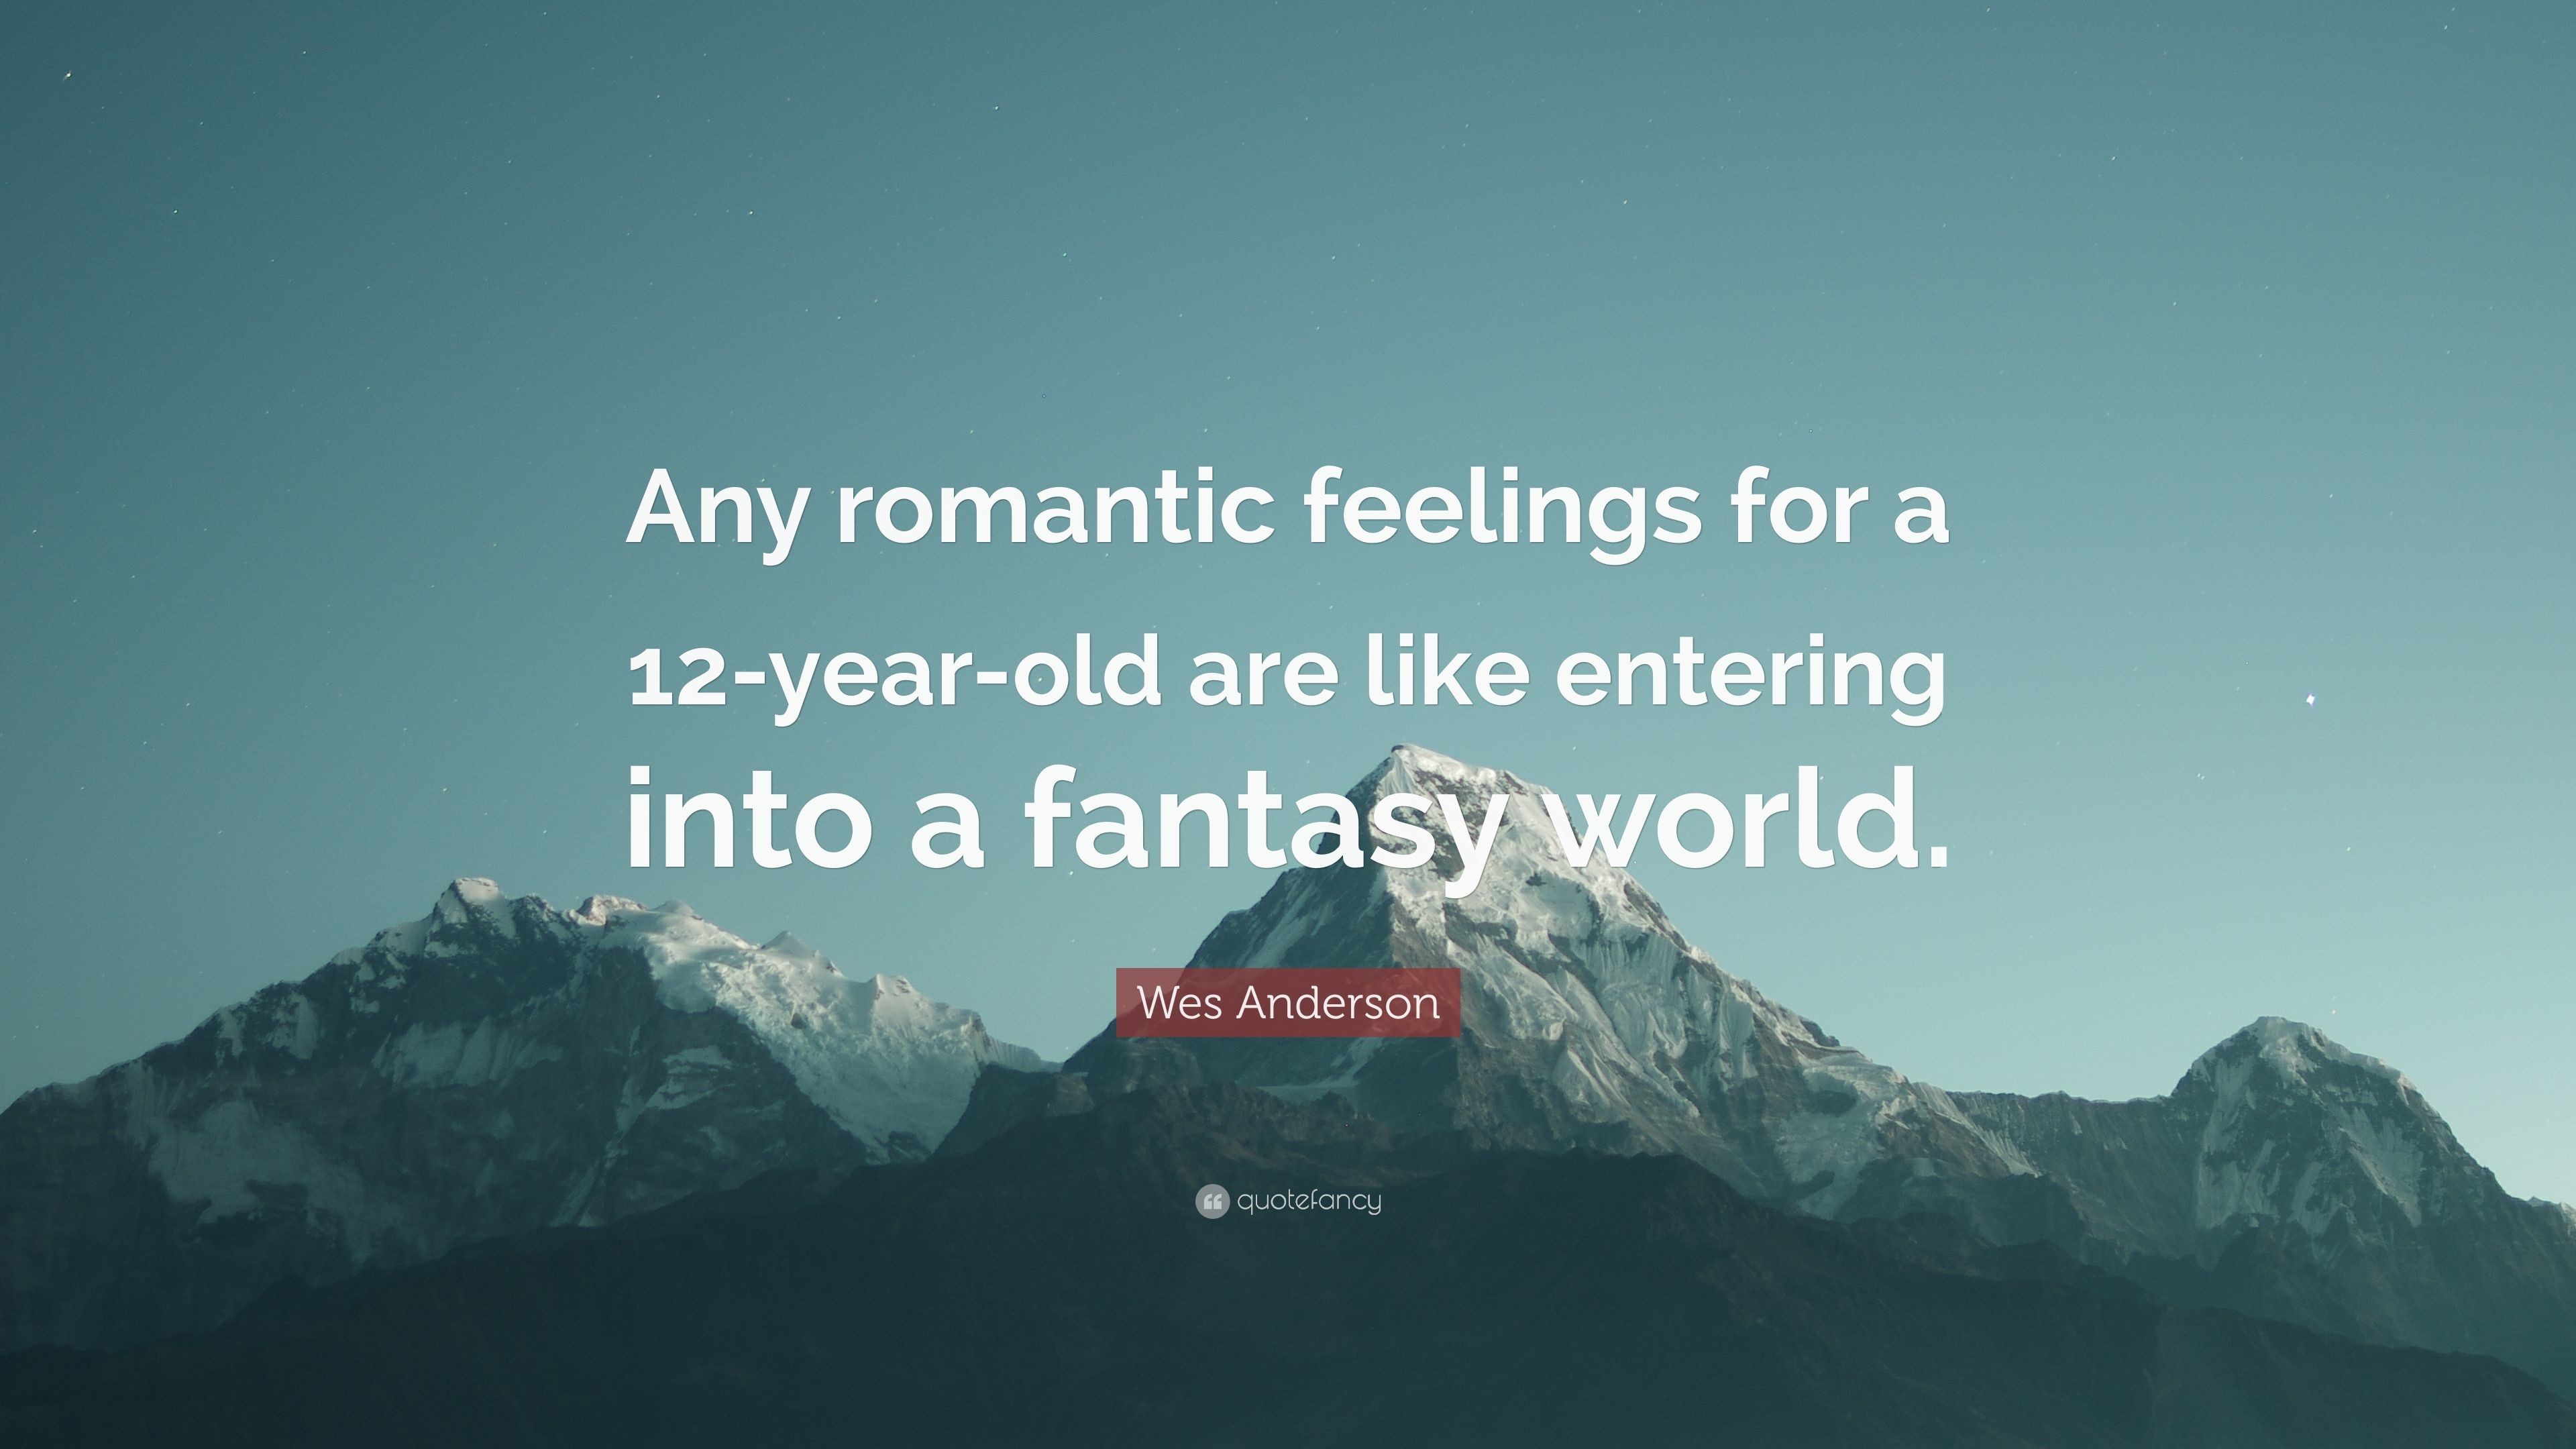 3840x2160 Wes Anderson Quote: “Any romantic feelings for a 12-year-old are